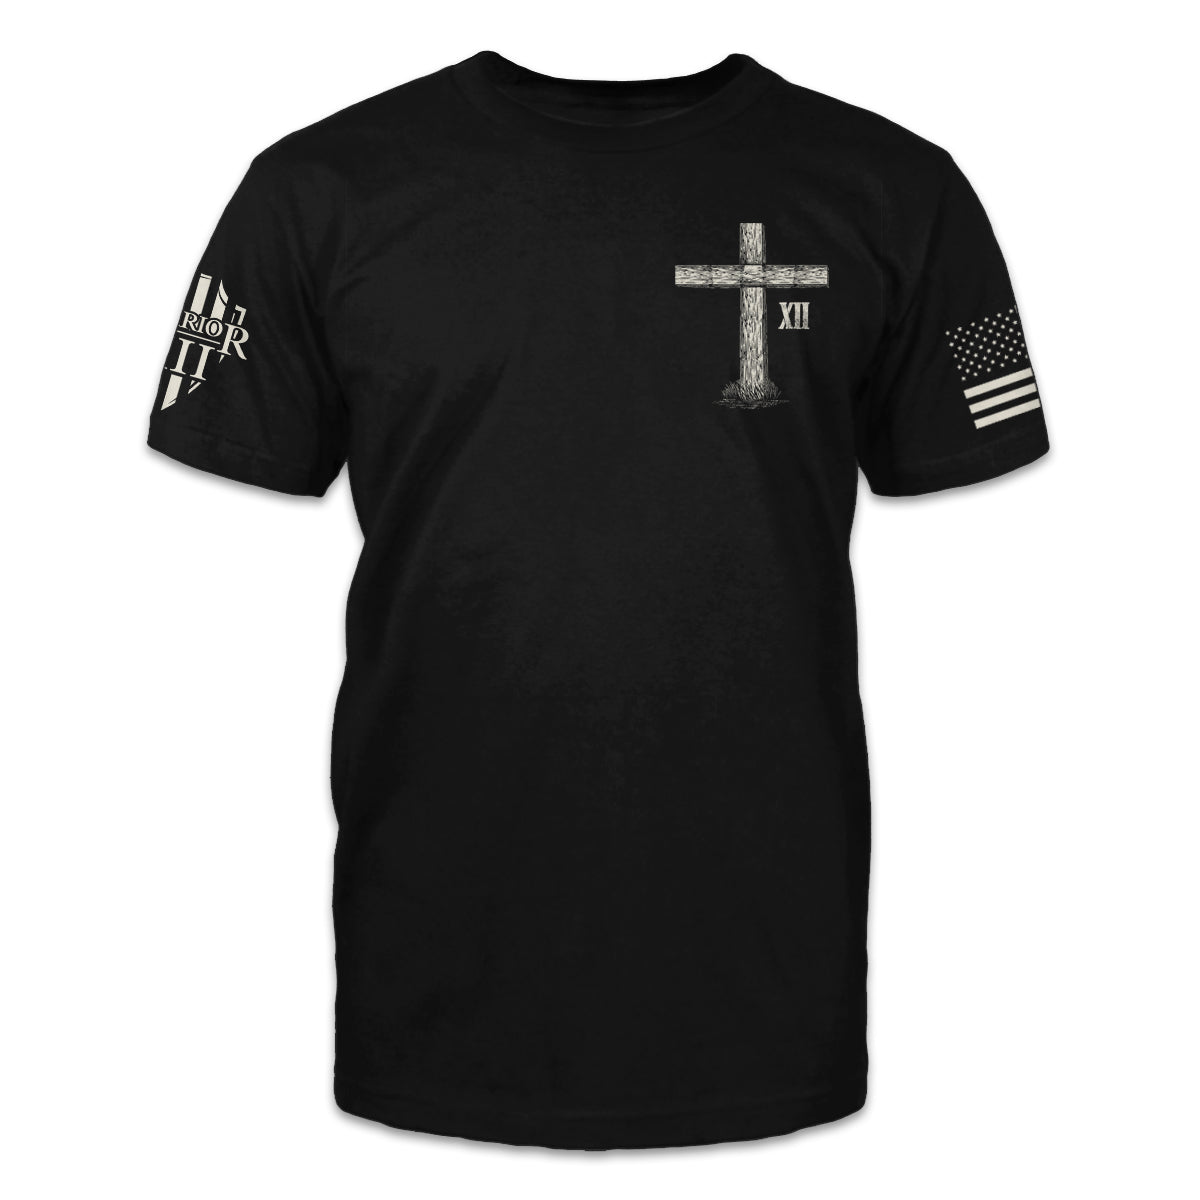 A black t-shirt with a cross printed on the front.